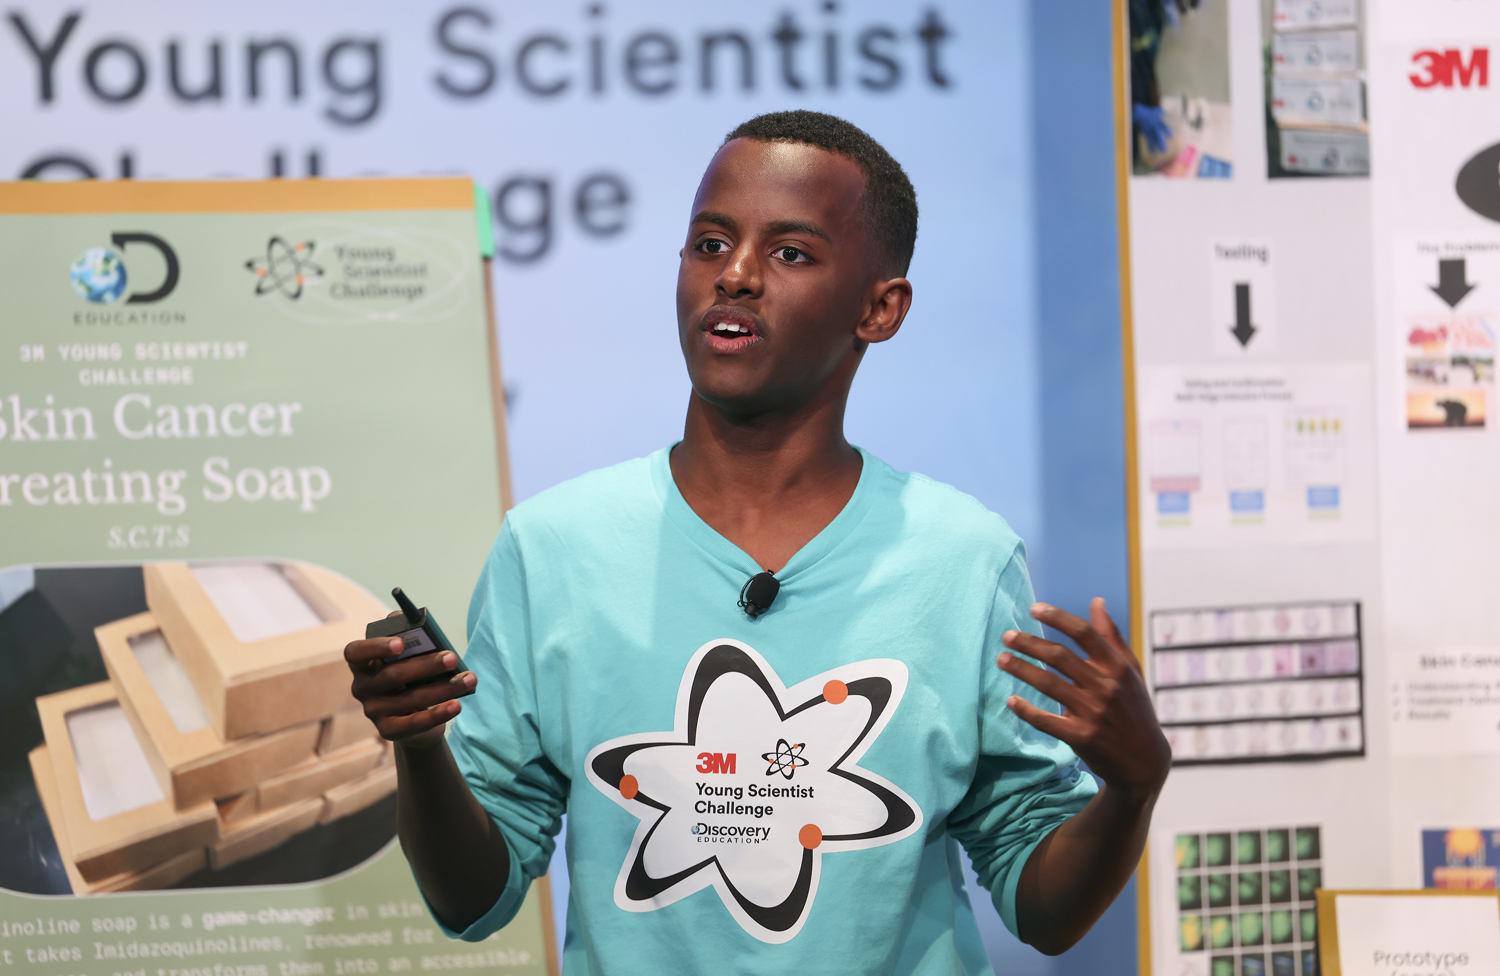 A teenage boy wears a 3M Young Scientist Challenge shirt and speaks in front of a display that says skin cancer treating soap.